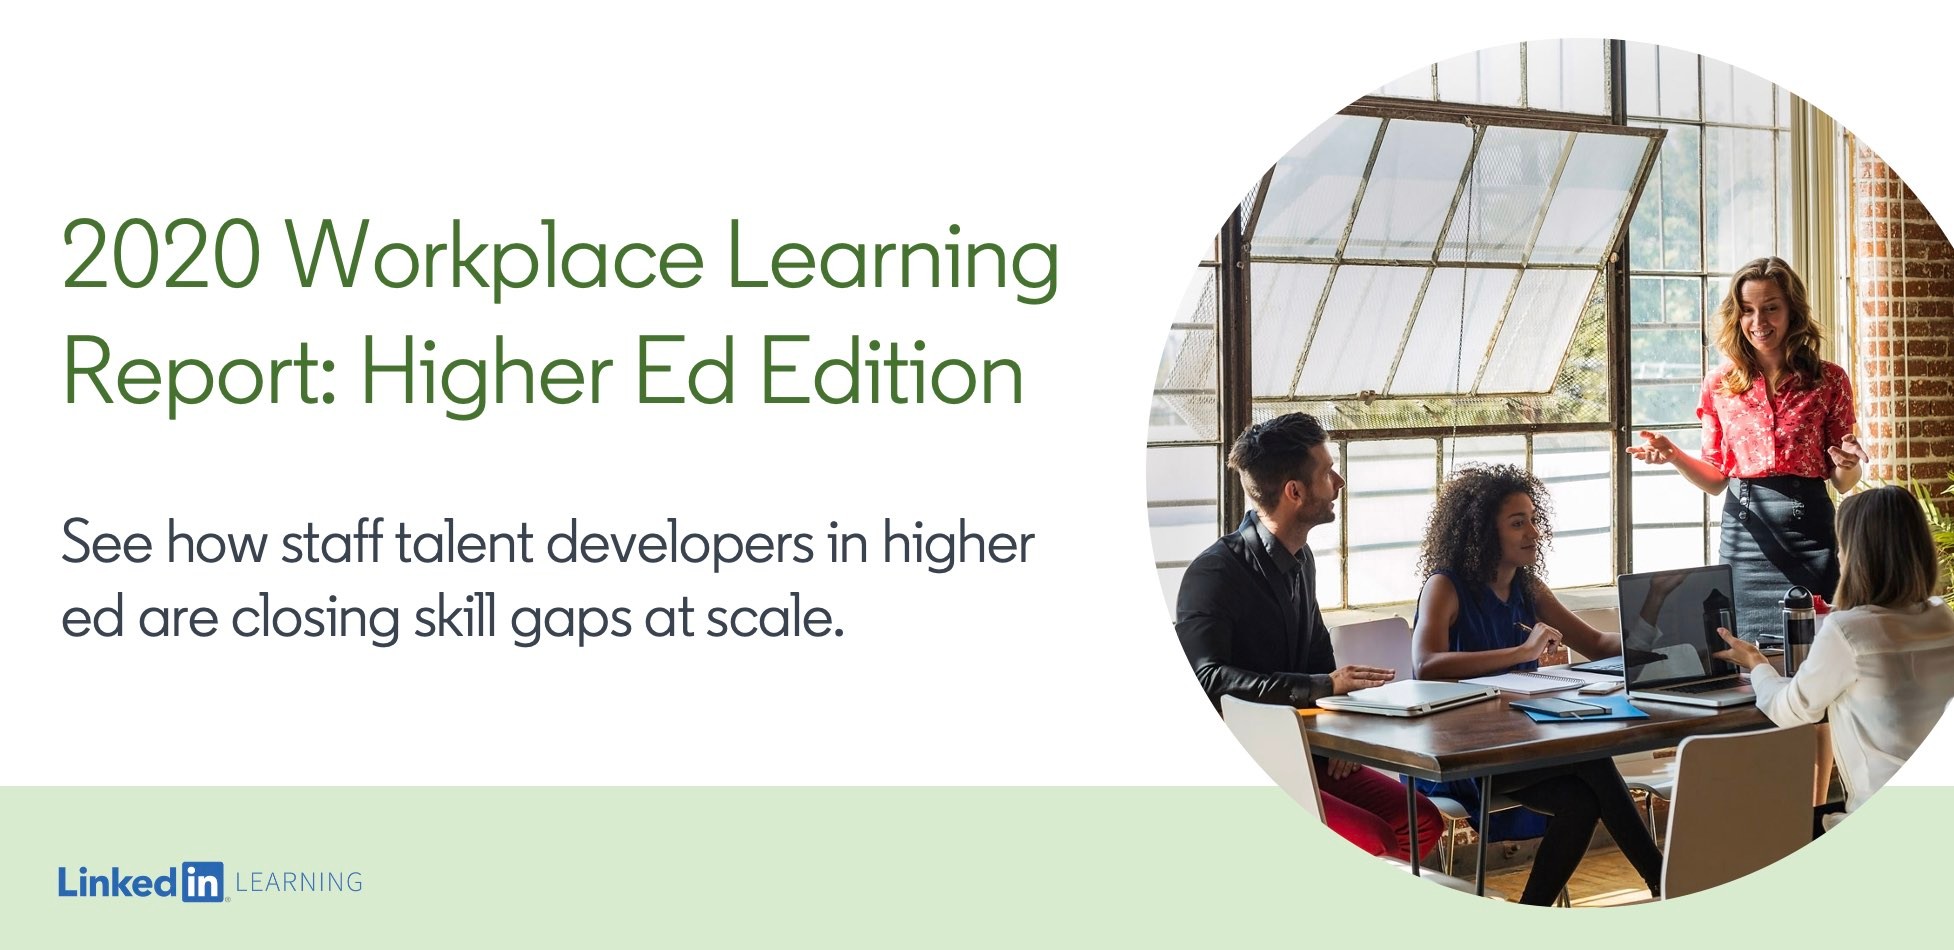 Workplace Learning Report Higher Education Edition